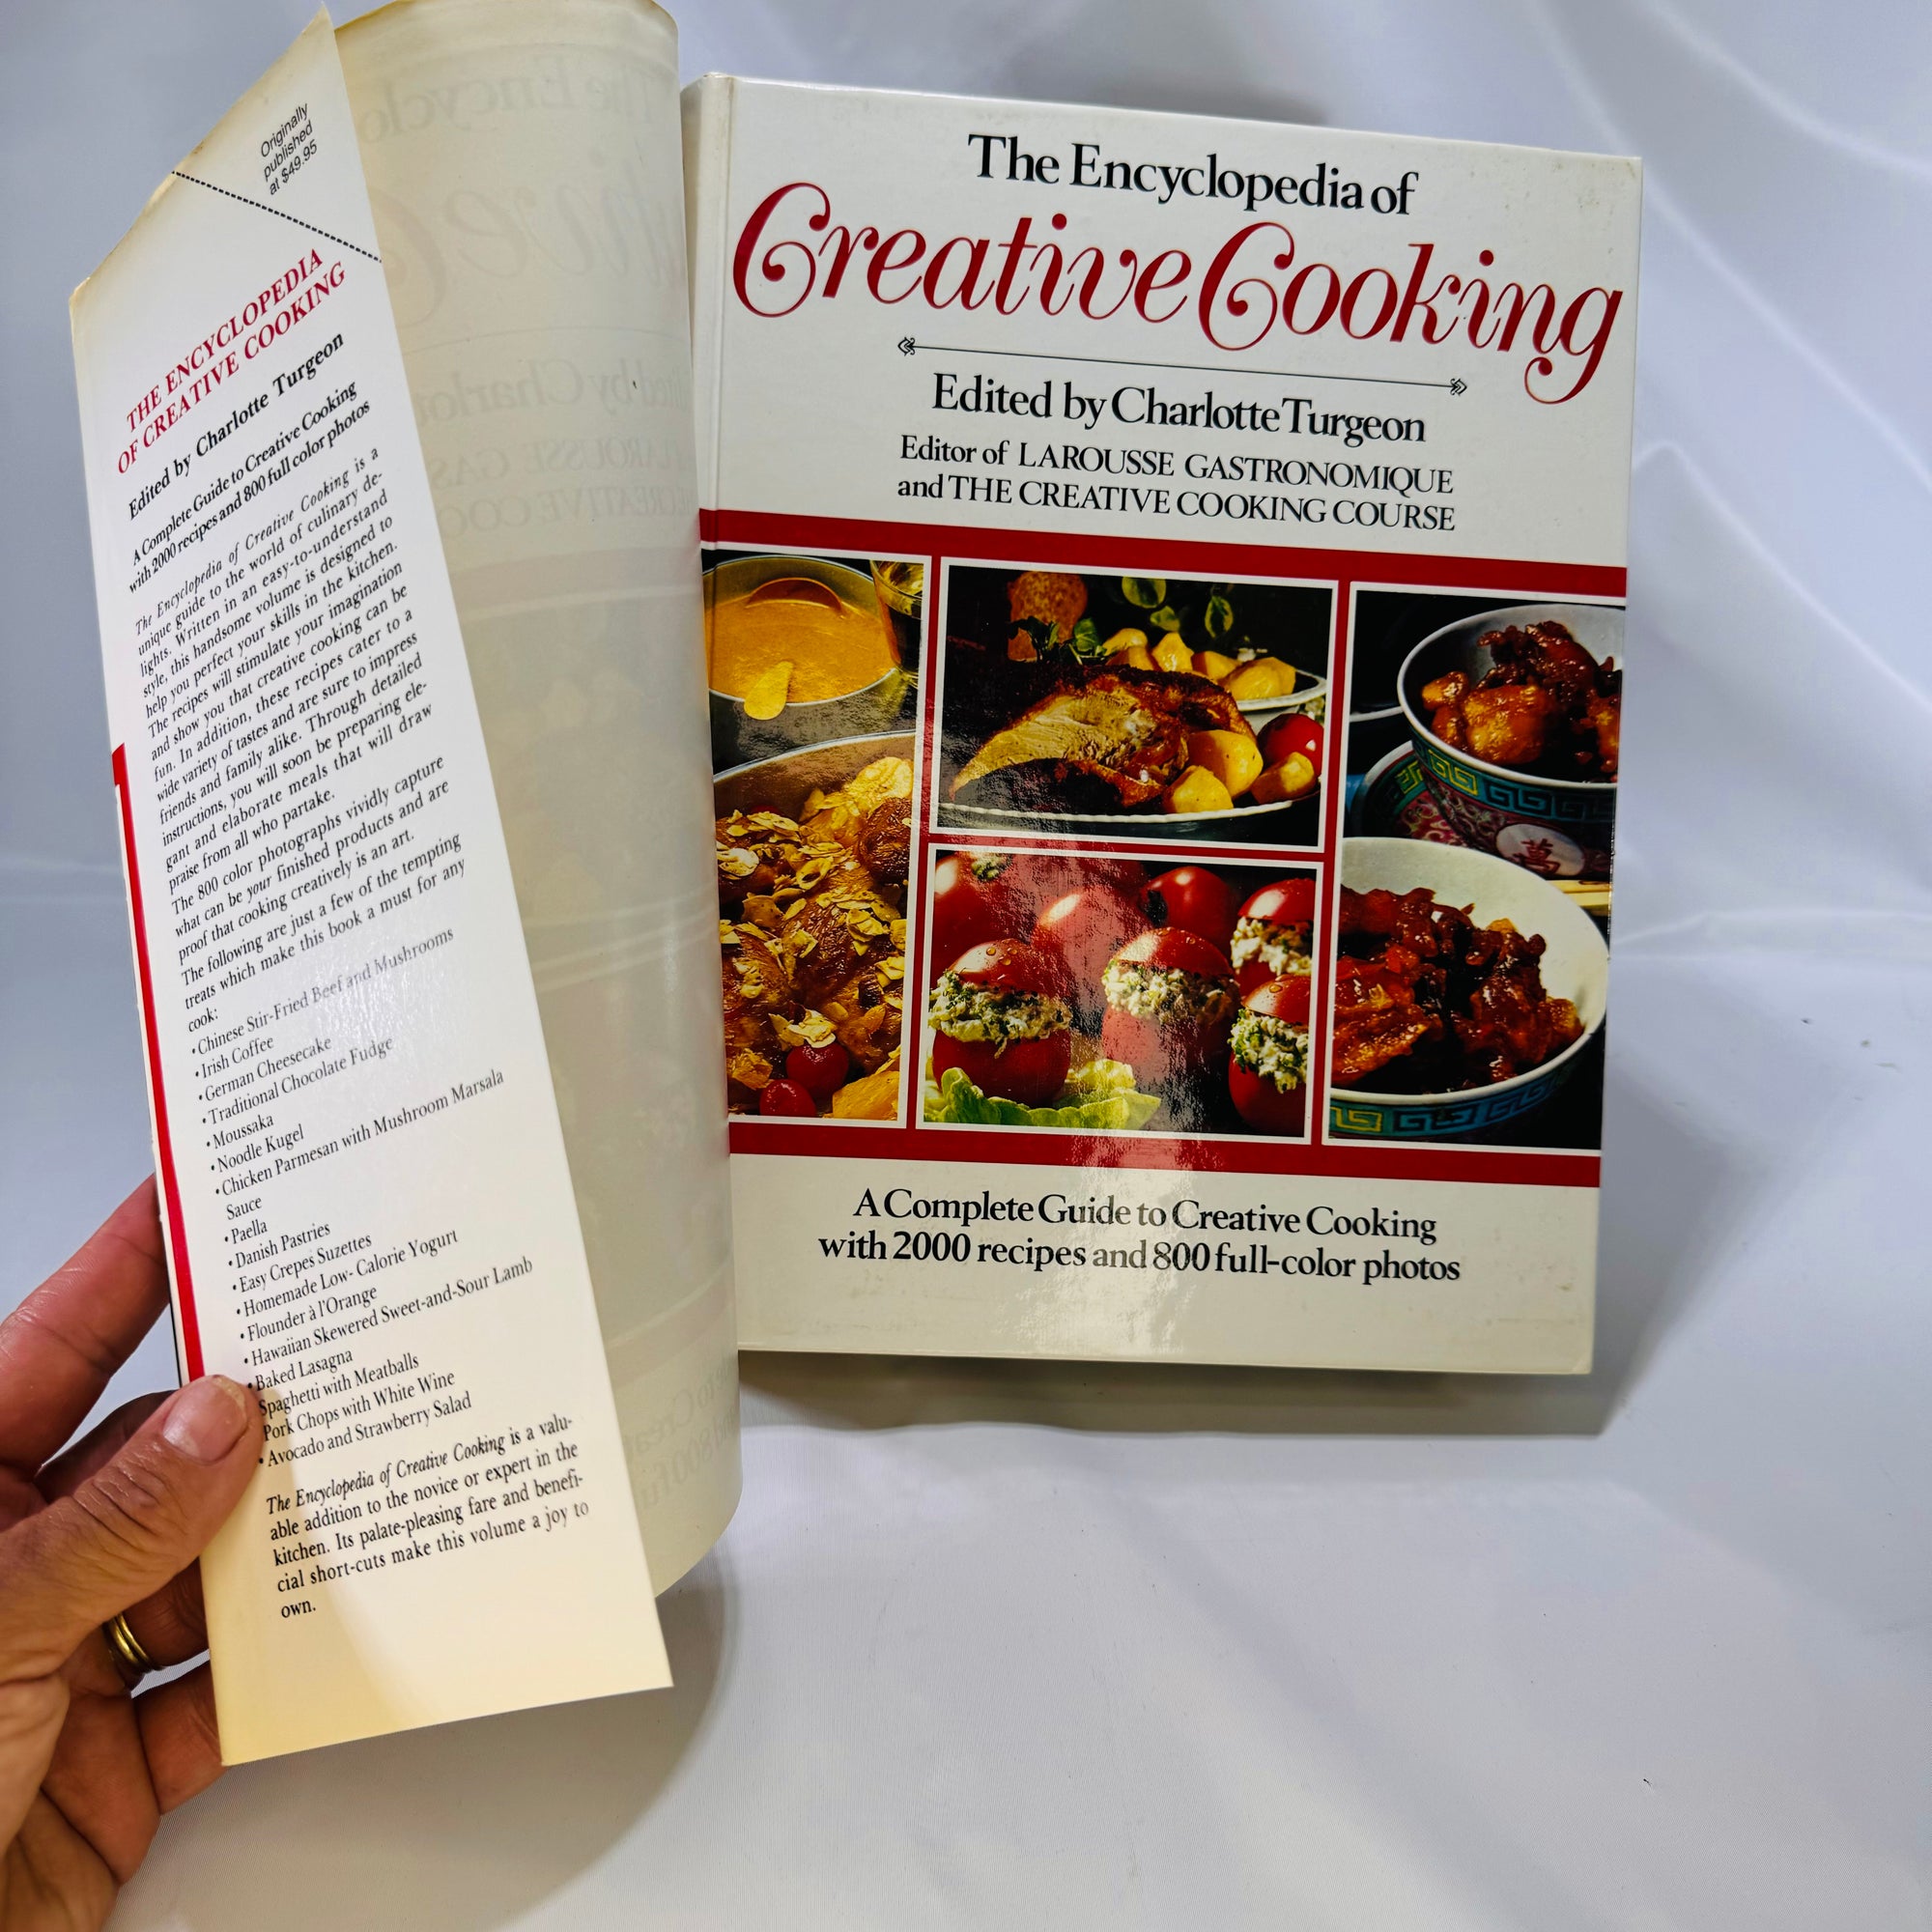 The Encyclopedia of Creative Cooking edited by Charlotte Turgeon First Edition 1980 Weathervane Books